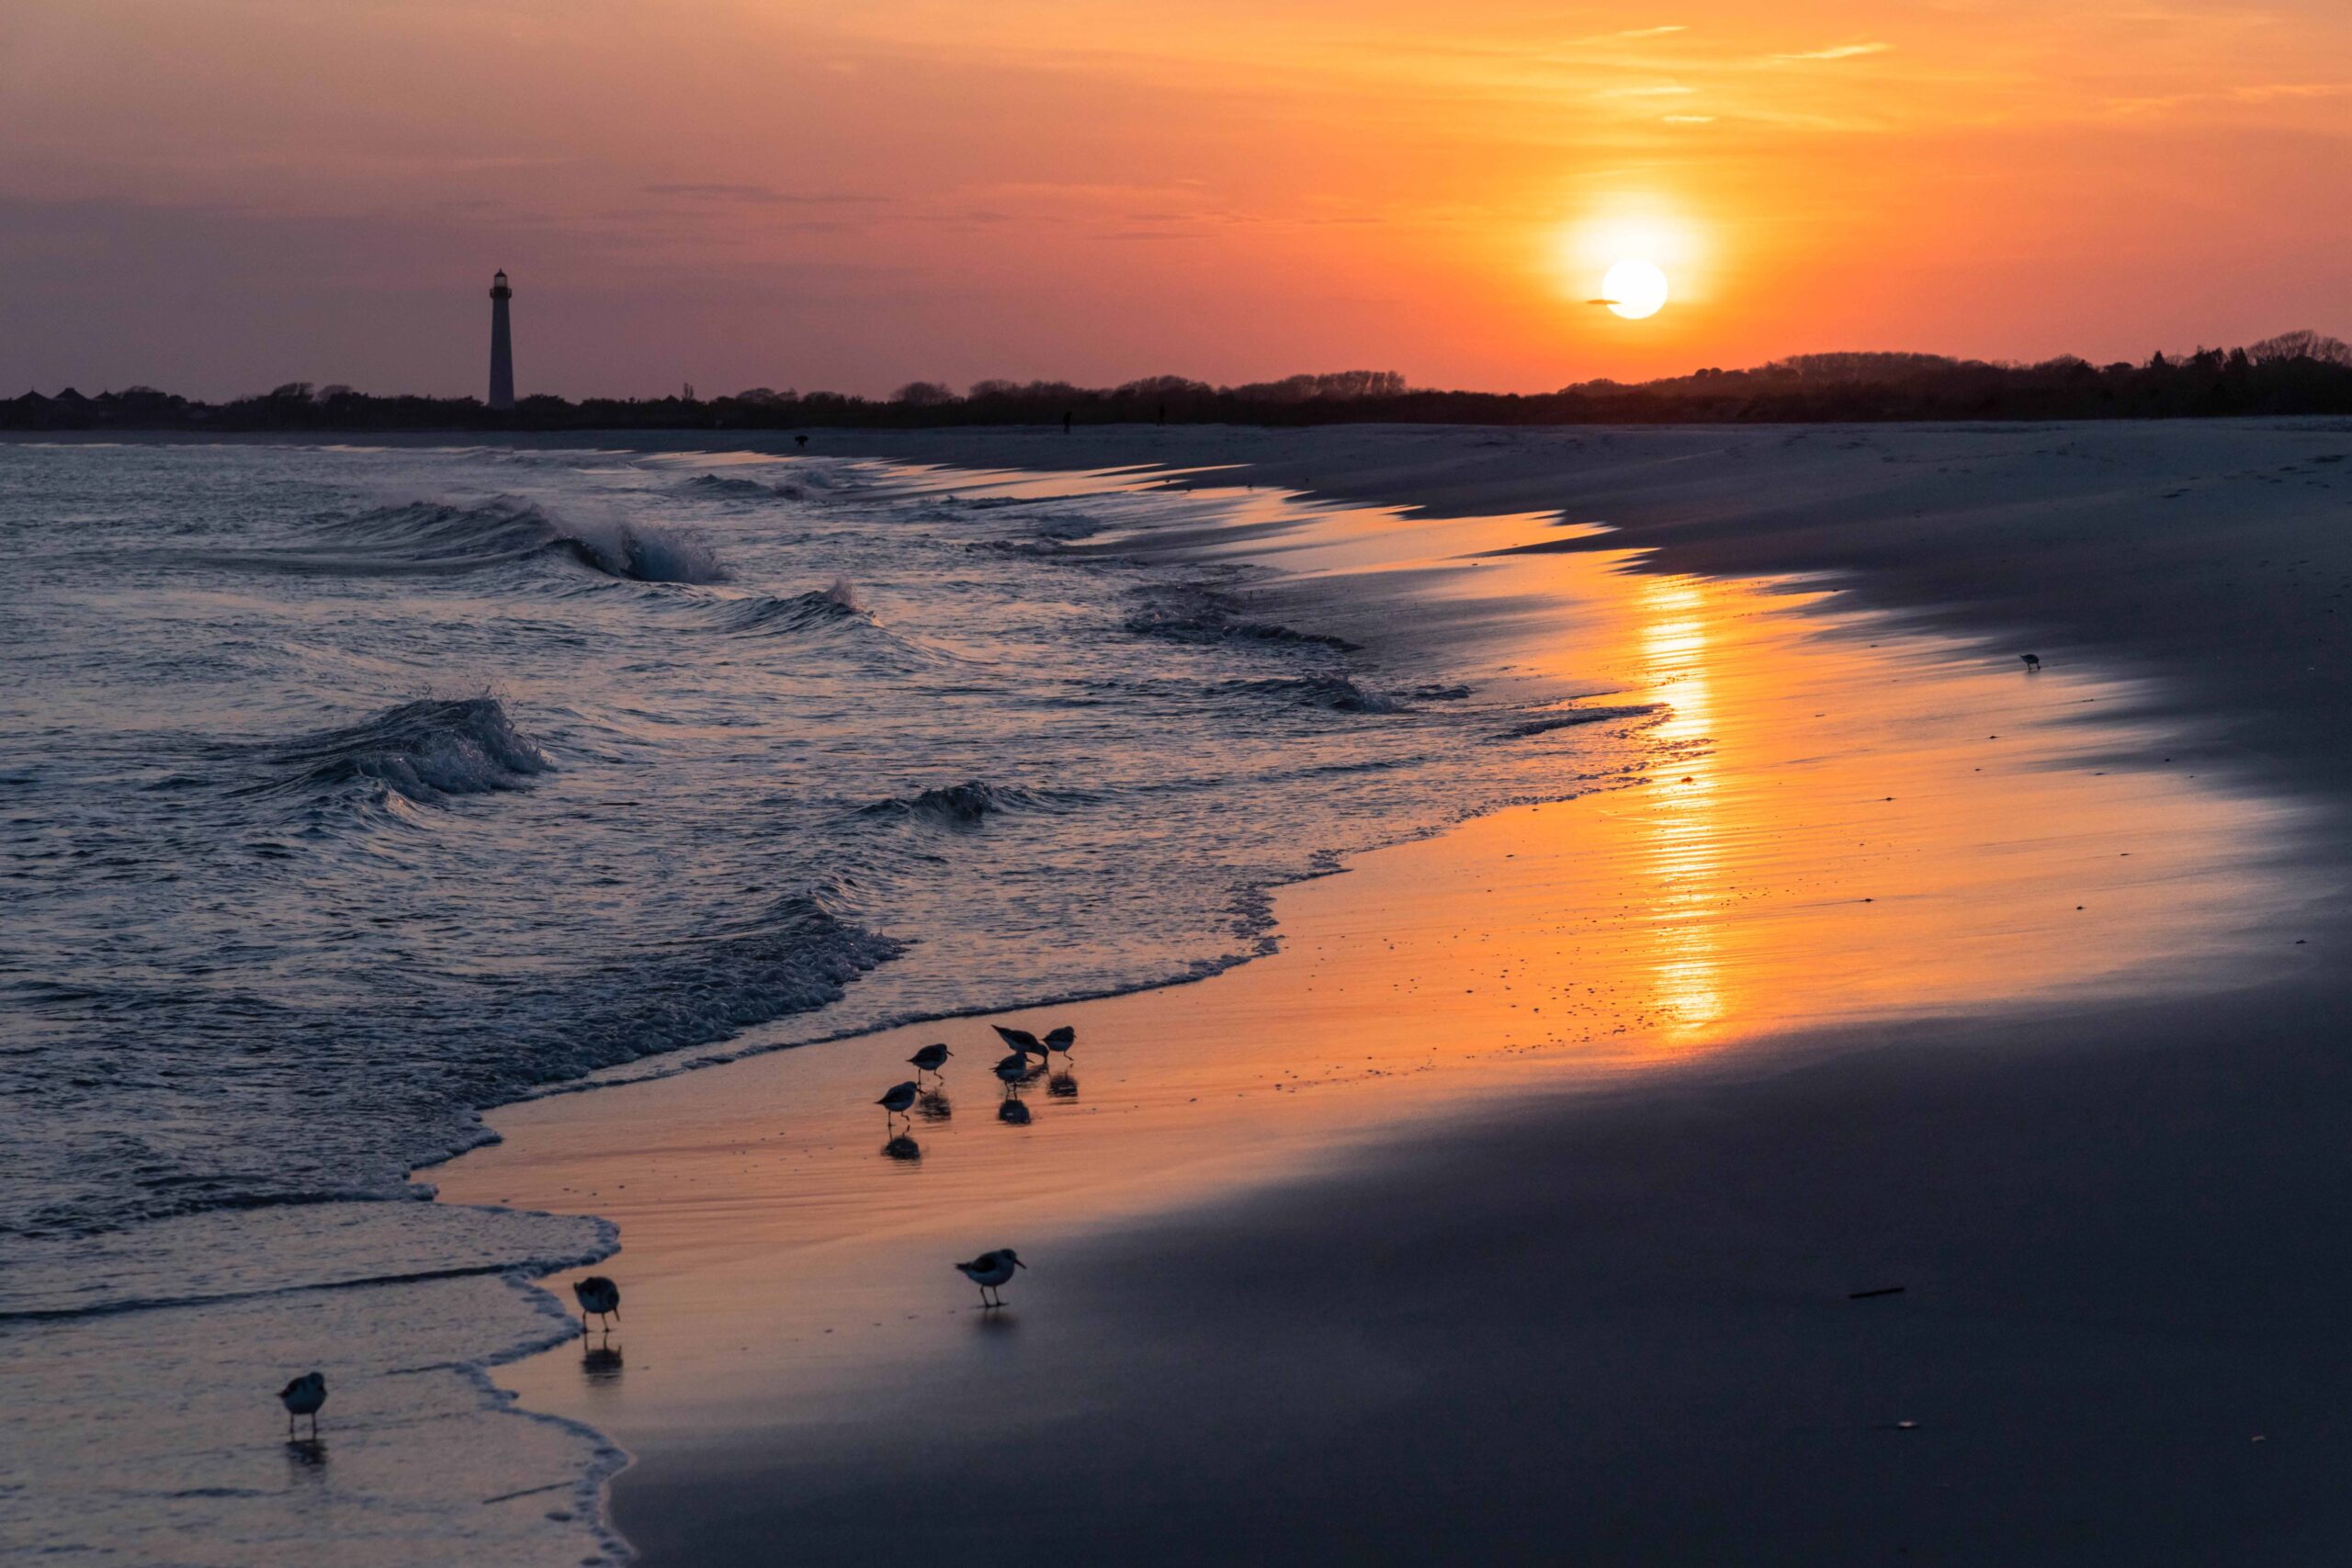 Orange sunset reflected in the shoreline with waves crashing, small birds gathered by the water, and the Cape May Lighthouse in the distance